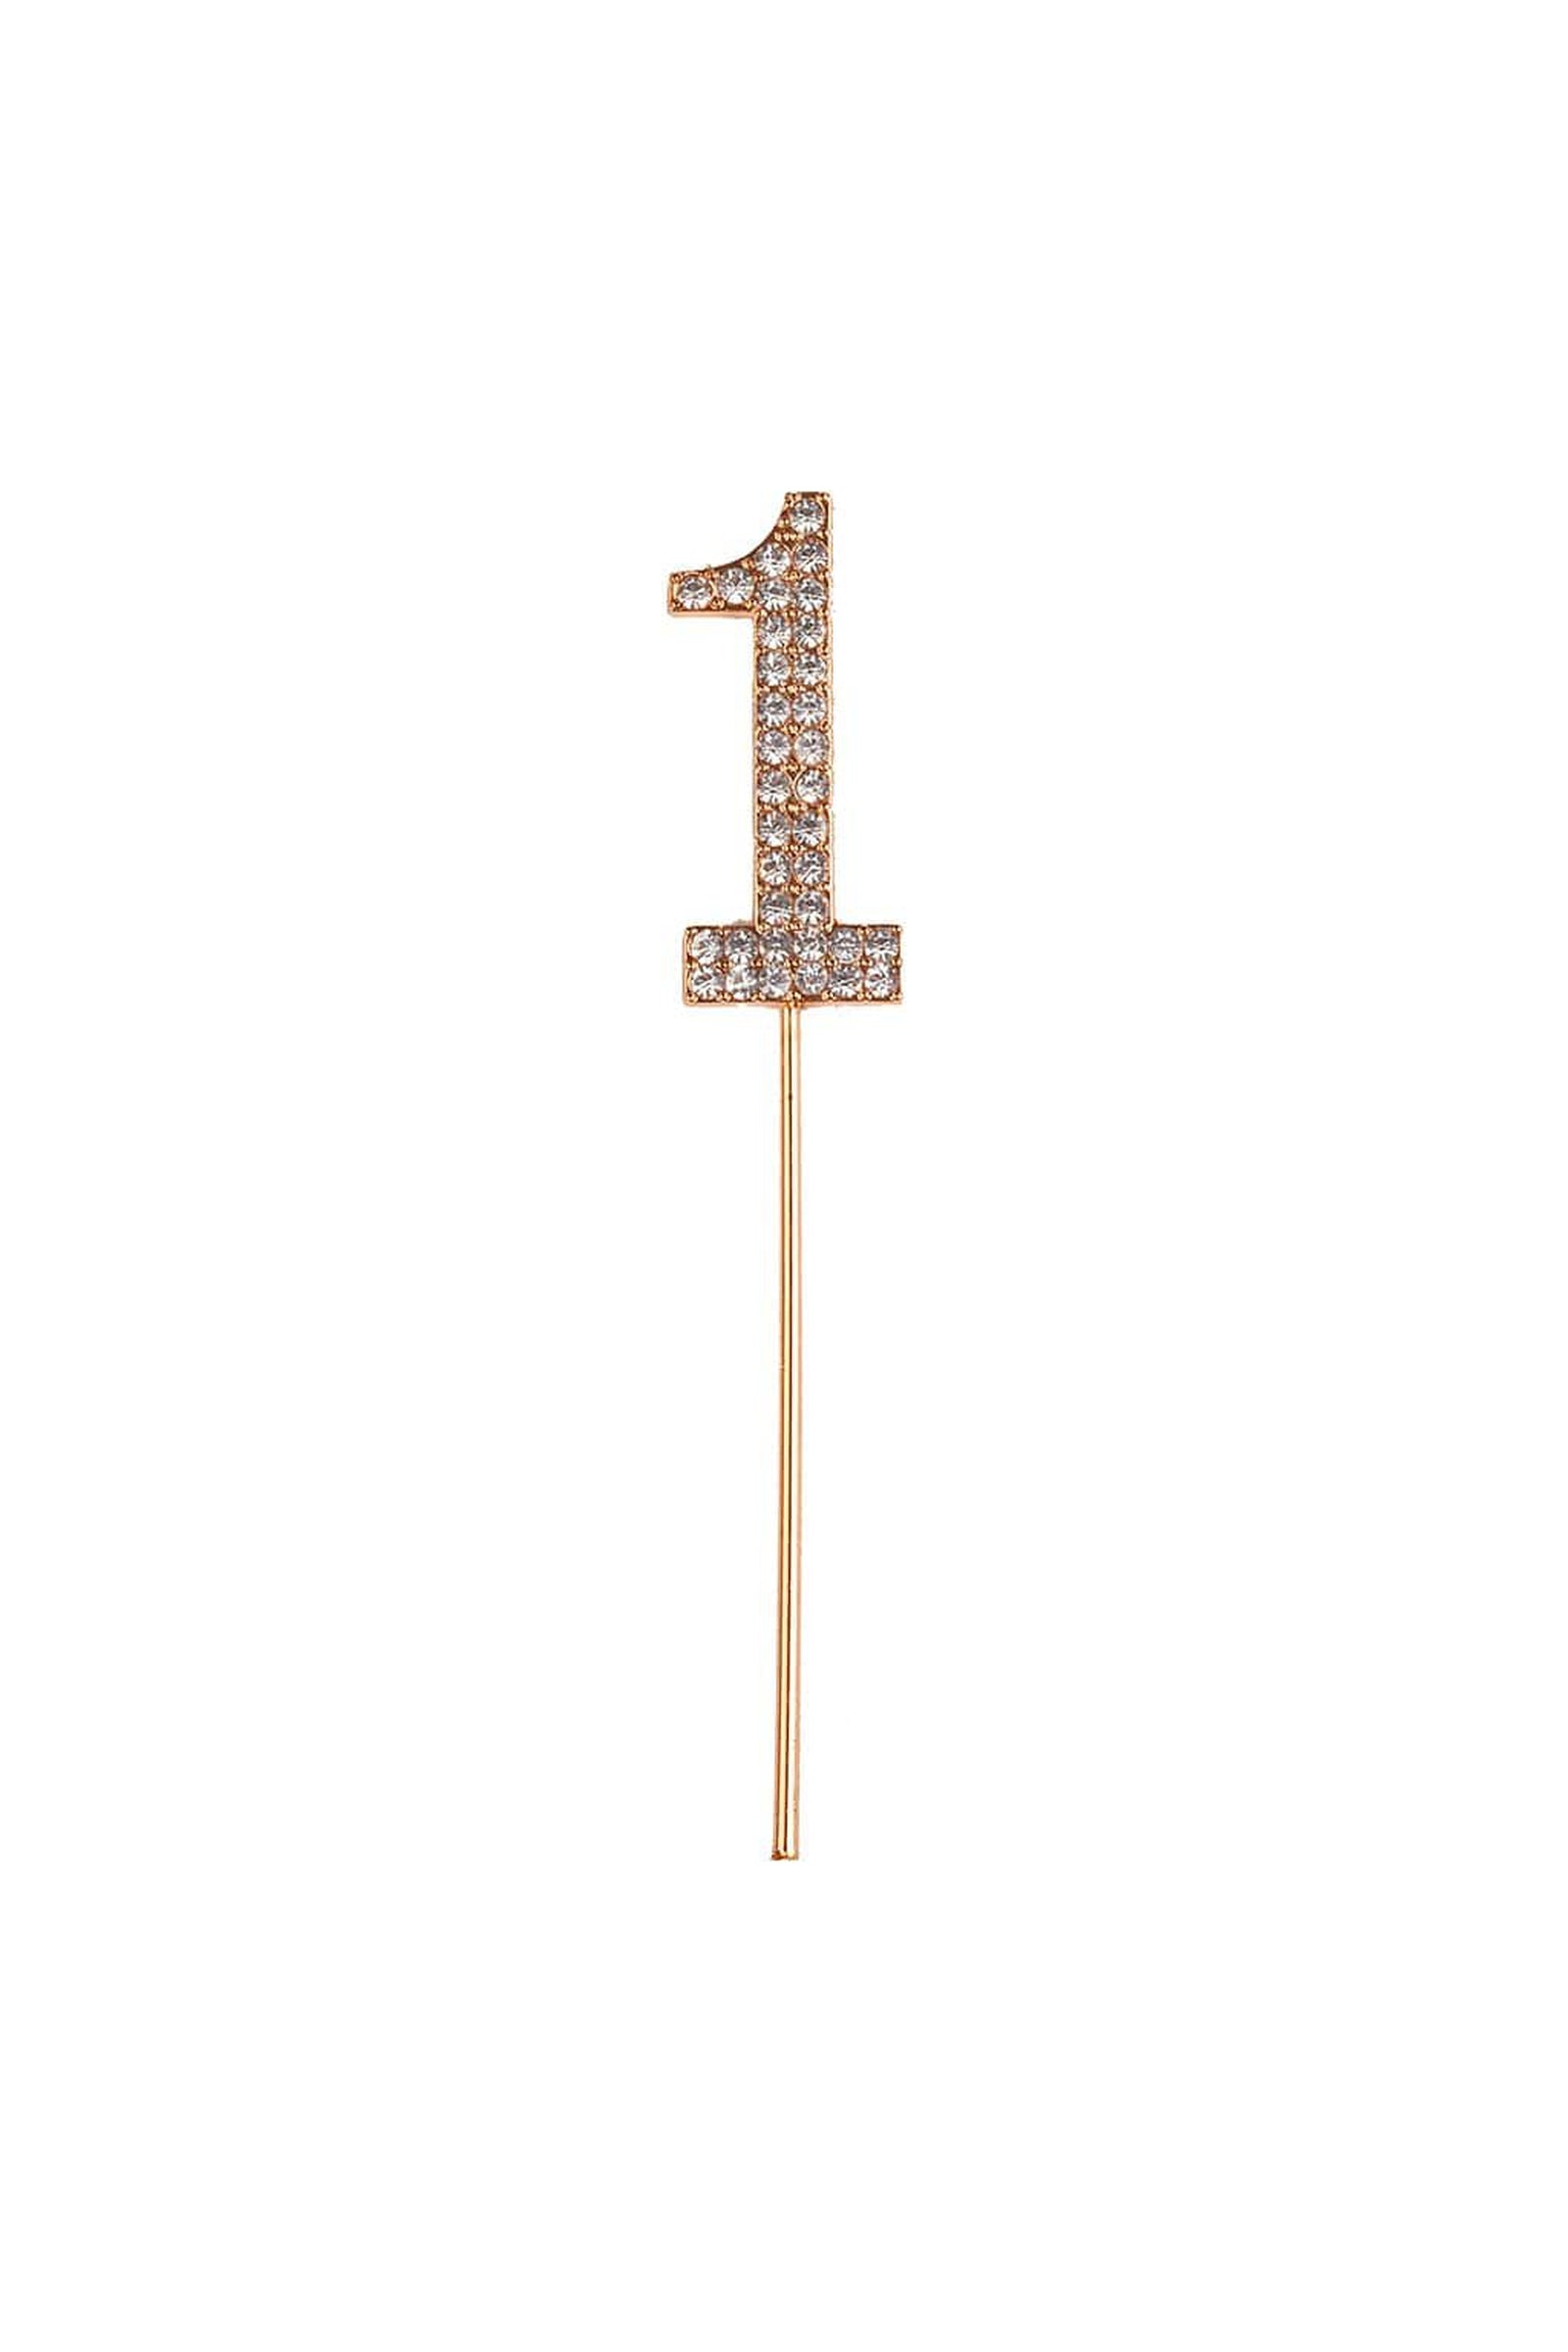 Rhinestone Cake Topper Numbers - Party